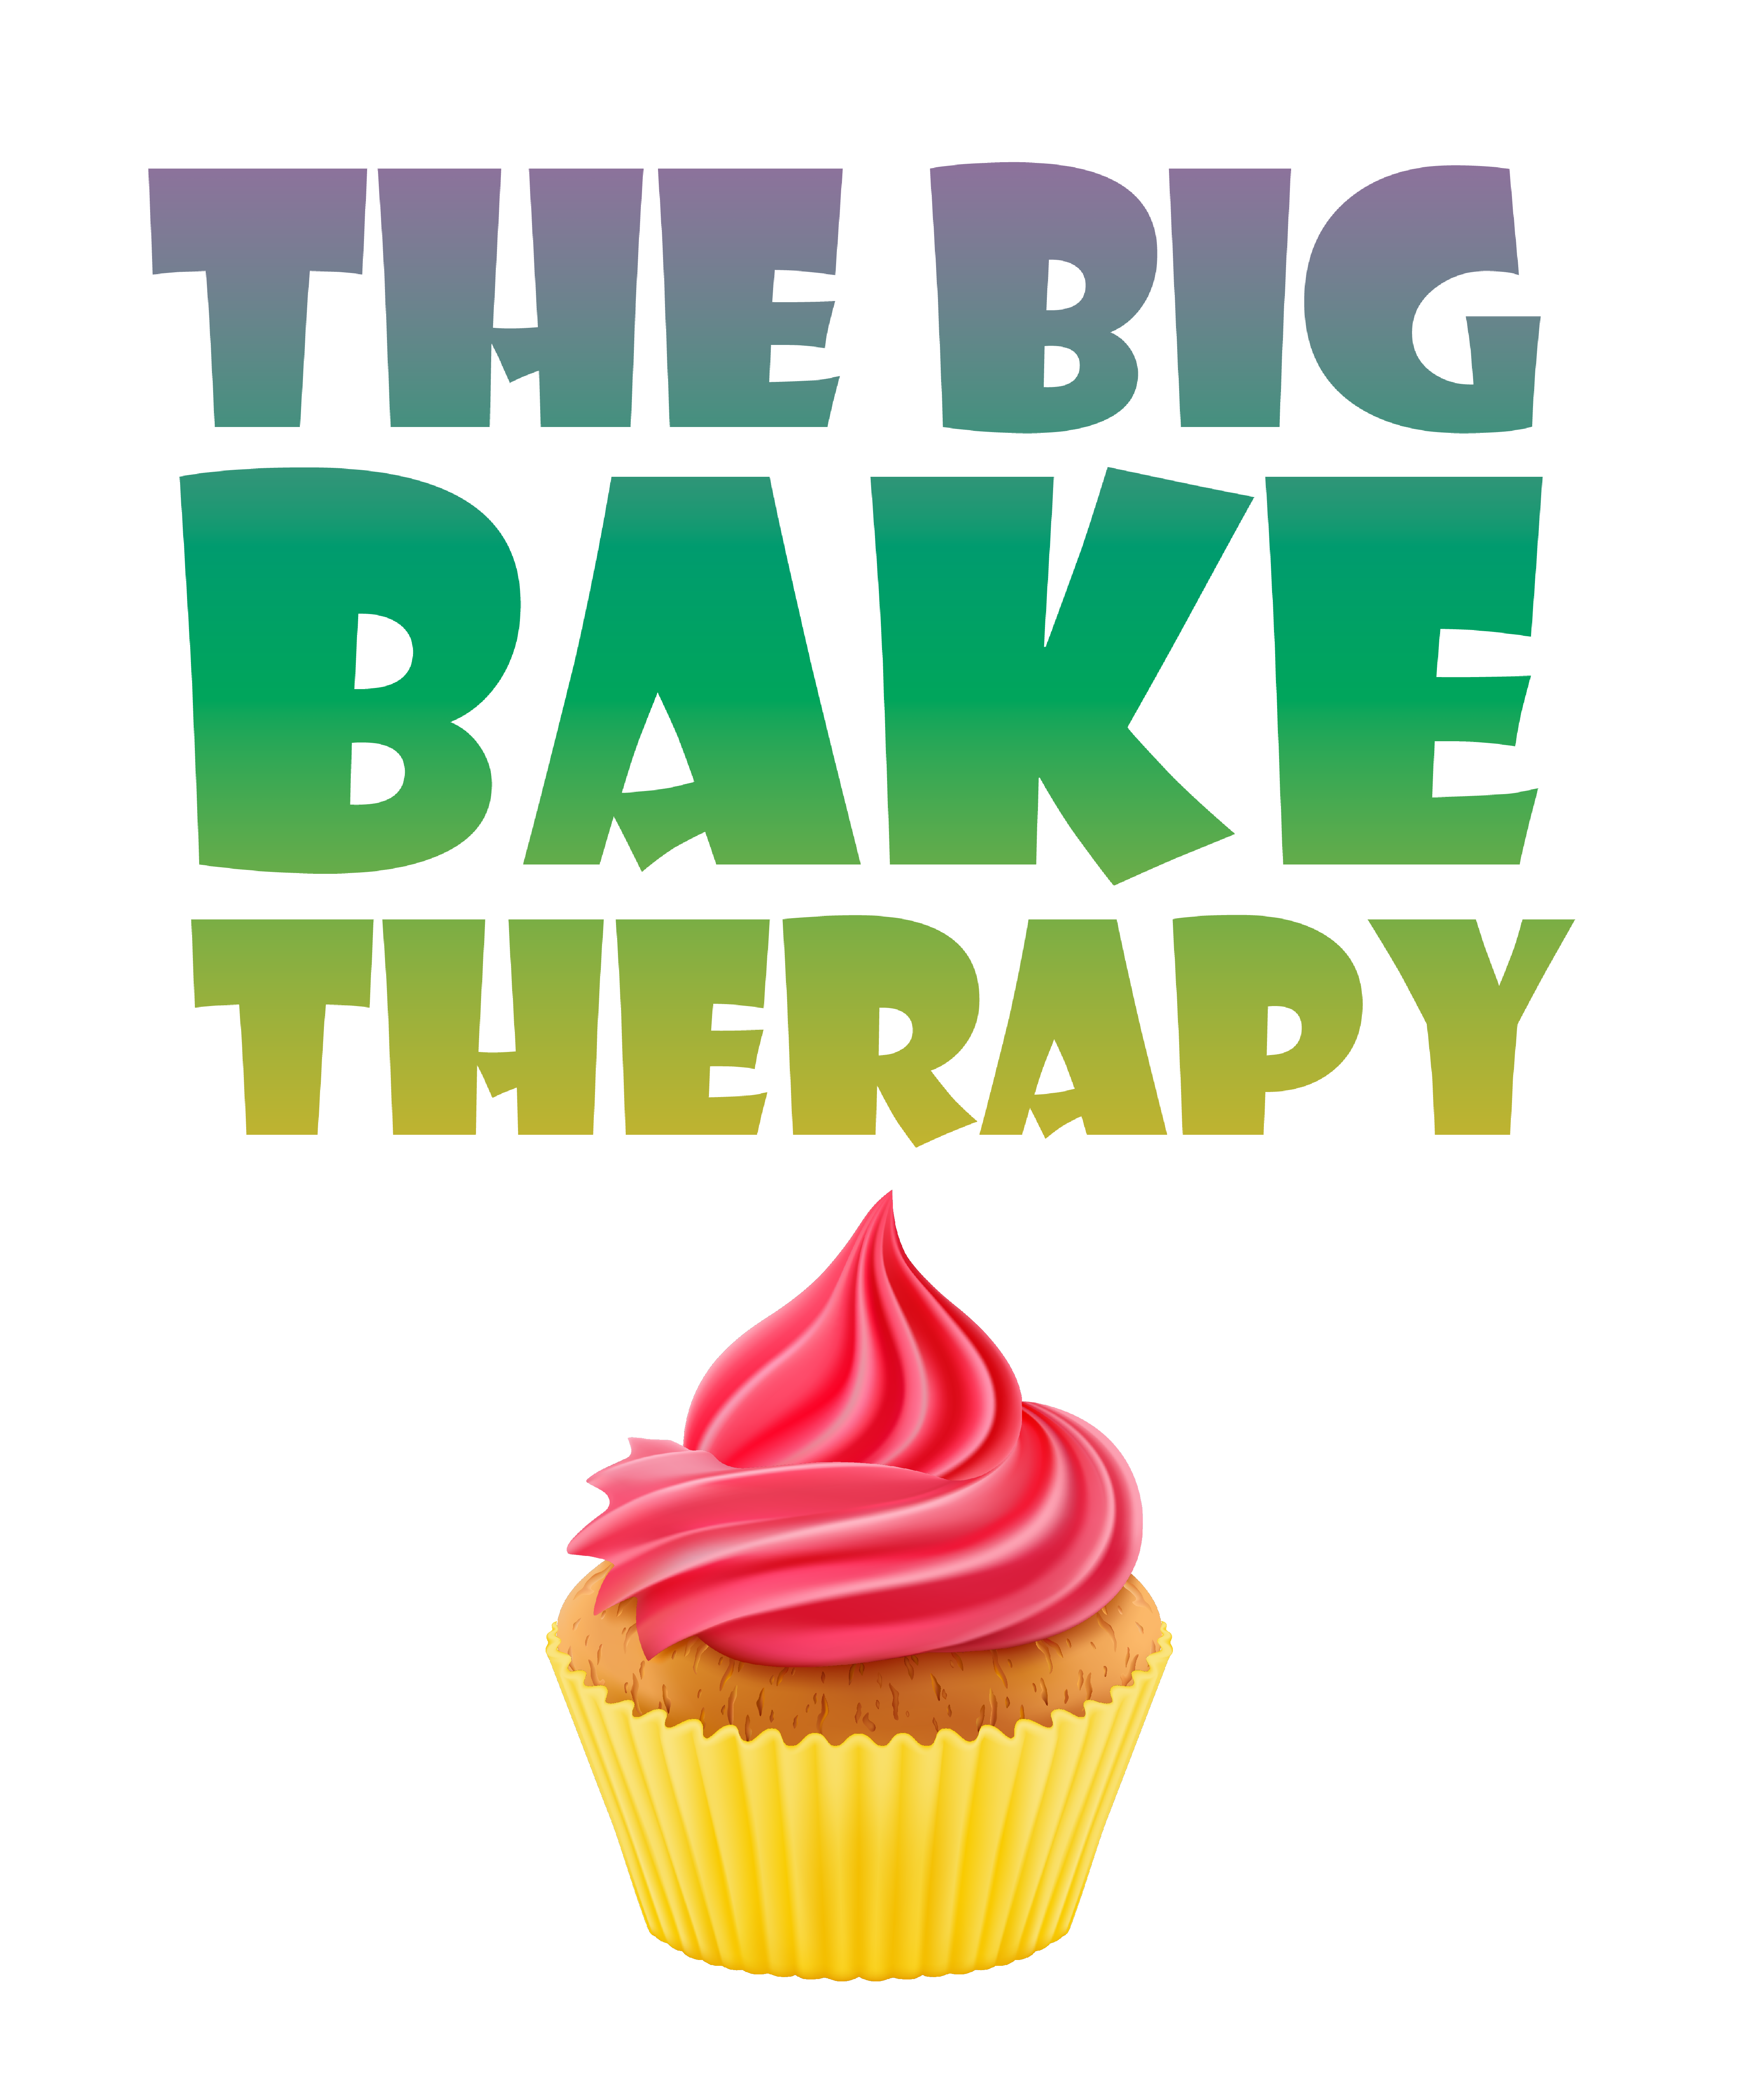 bake therapy